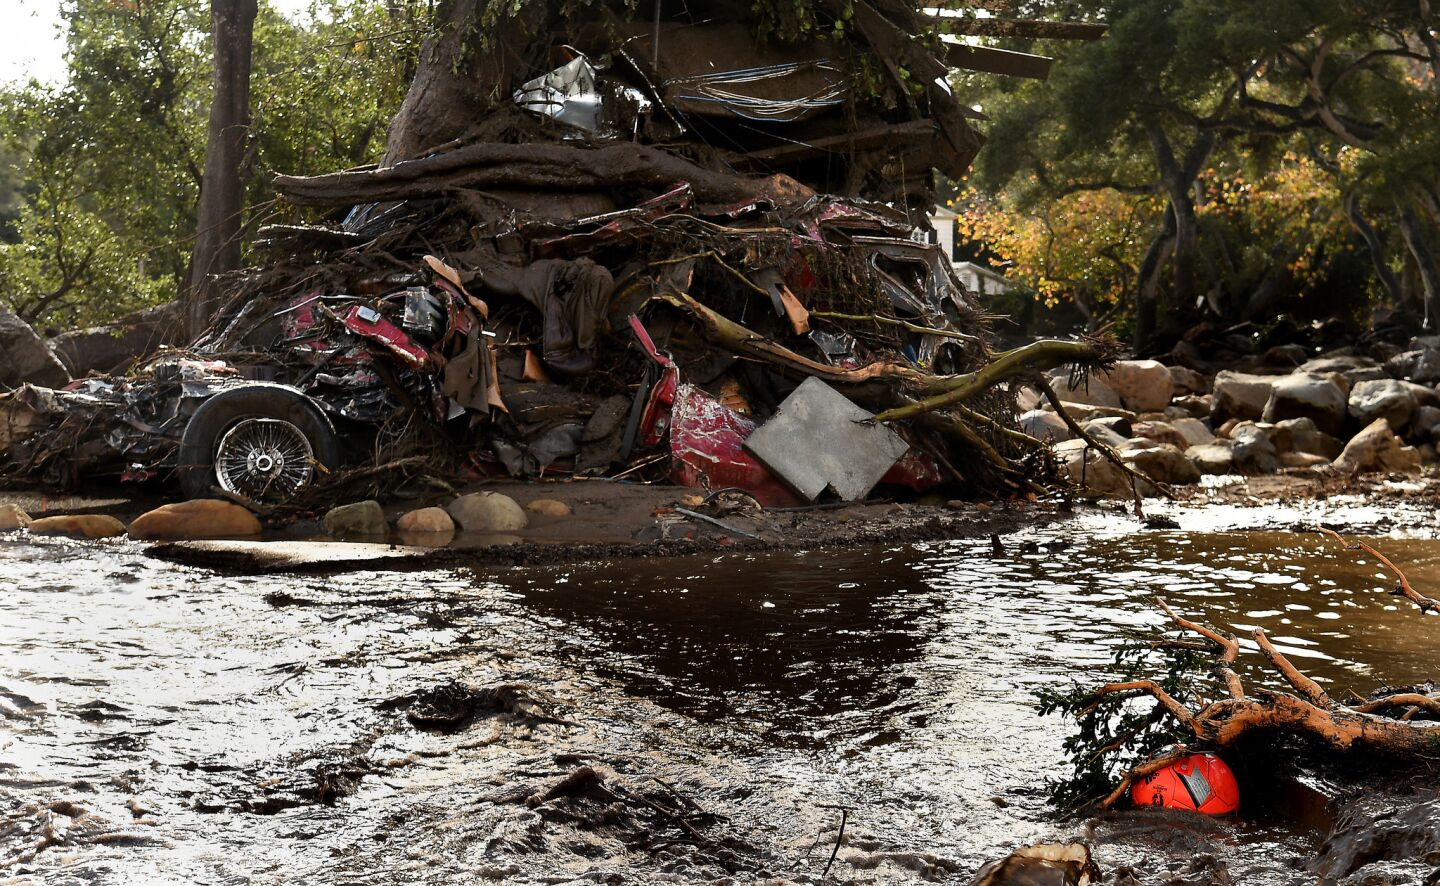 A mangled car along with other debris is wrapped around a tree along Hot Springs Road in Montecito.